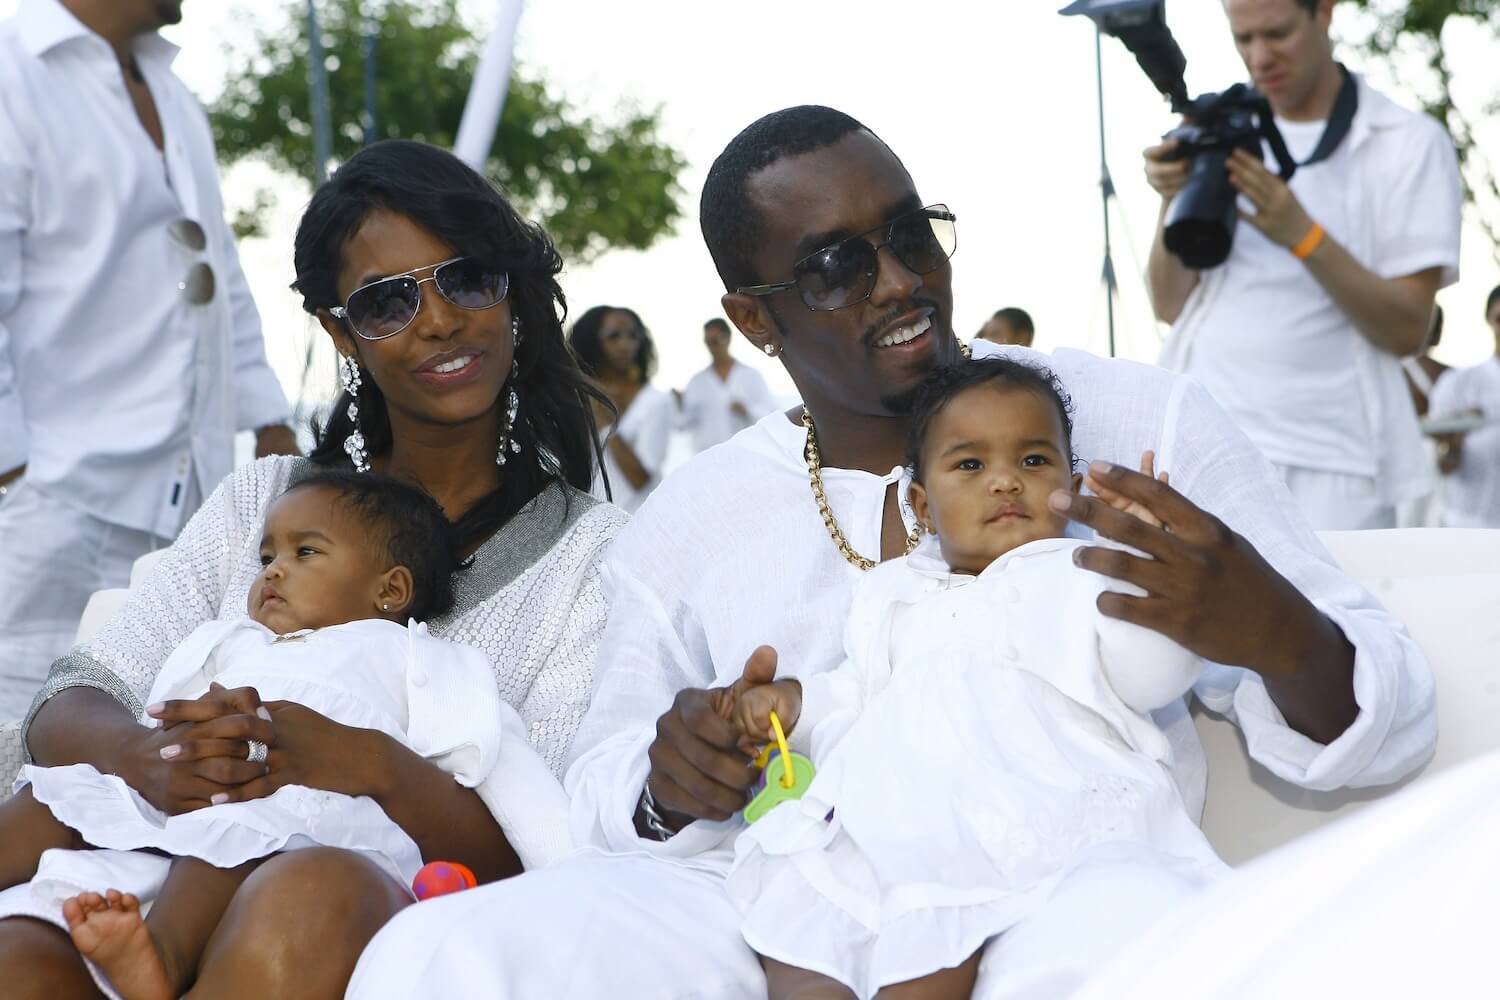 Kim Porter and Sean 'P. Diddy' Combs dressed in white while holding their infant twin daughters